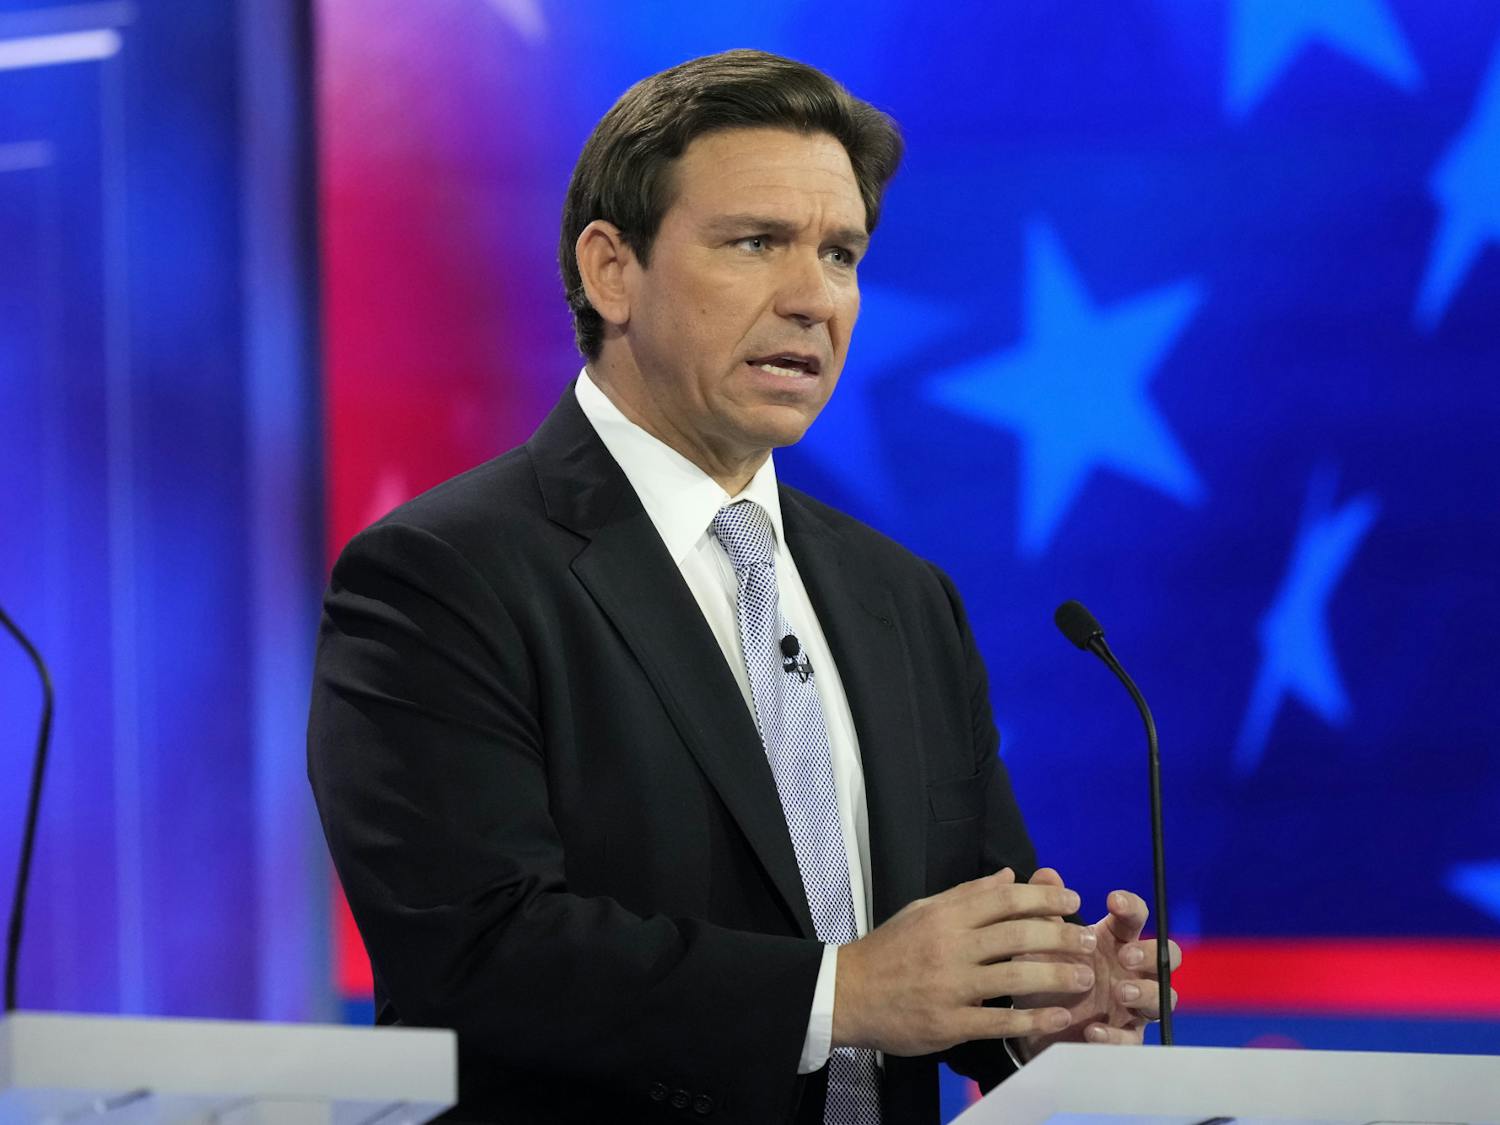 Republican presidential candidate Florida Gov. Ron DeSantis speaks during a Republican presidential primary debate hosted by NBC News, Wednesday, Nov. 8, 2023, at the Adrienne Arsht Center for the Performing Arts of Miami-Dade County in Miami. (AP Photo/Rebecca Blackwell)